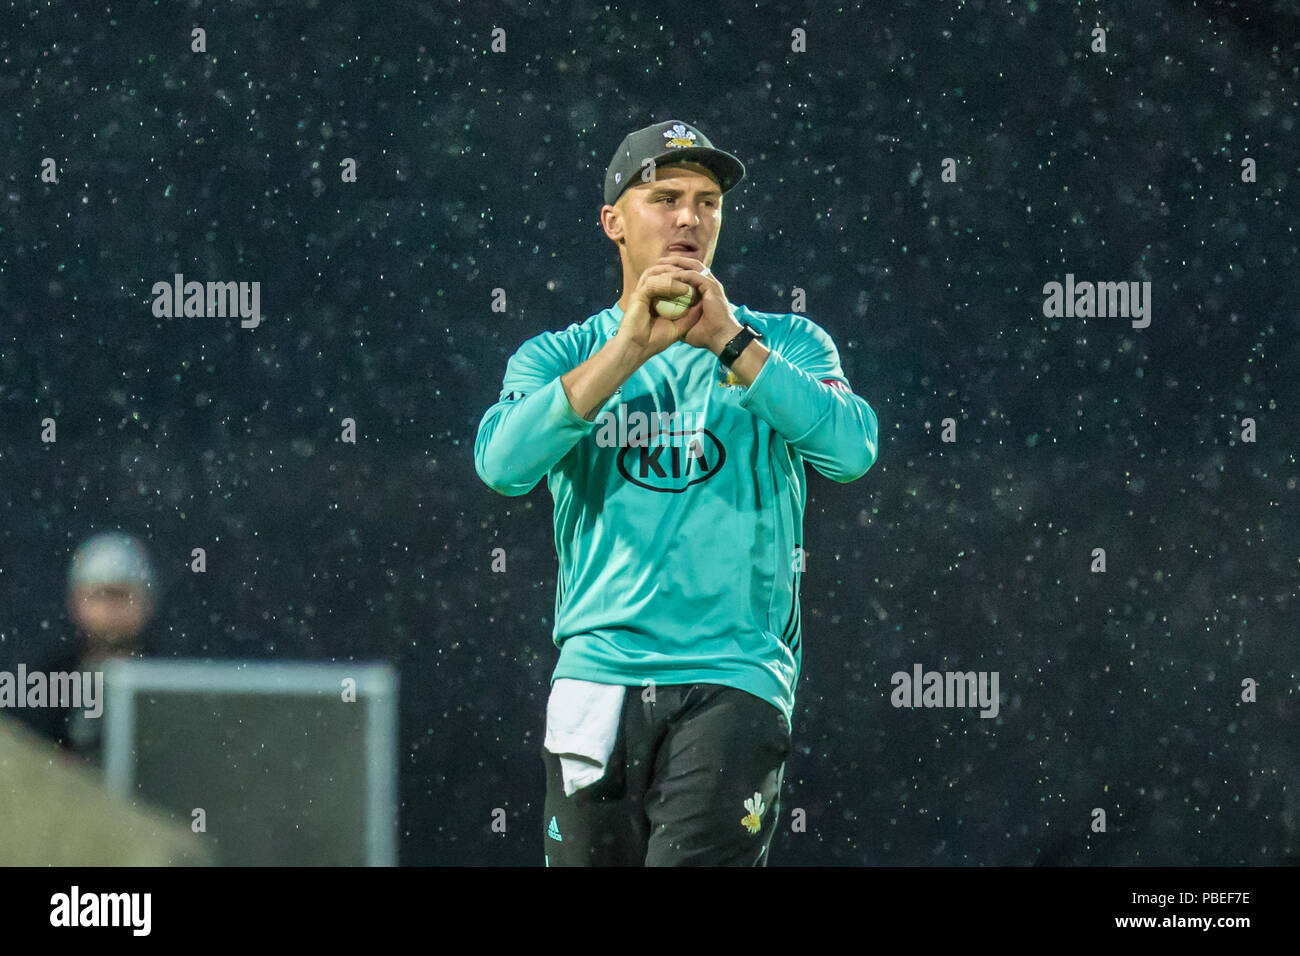 London, UK. 27 July, 2018. Jason Roy takes a great catch on the boundary to get rid of  Roelof van der Merwe off the bowling of Mathew Pillans in the rain  fielding for Surrey against  Somerset in the Vitality T20 Blast match at the Kia Oval. David Rowe/Alamy Live News Stock Photo